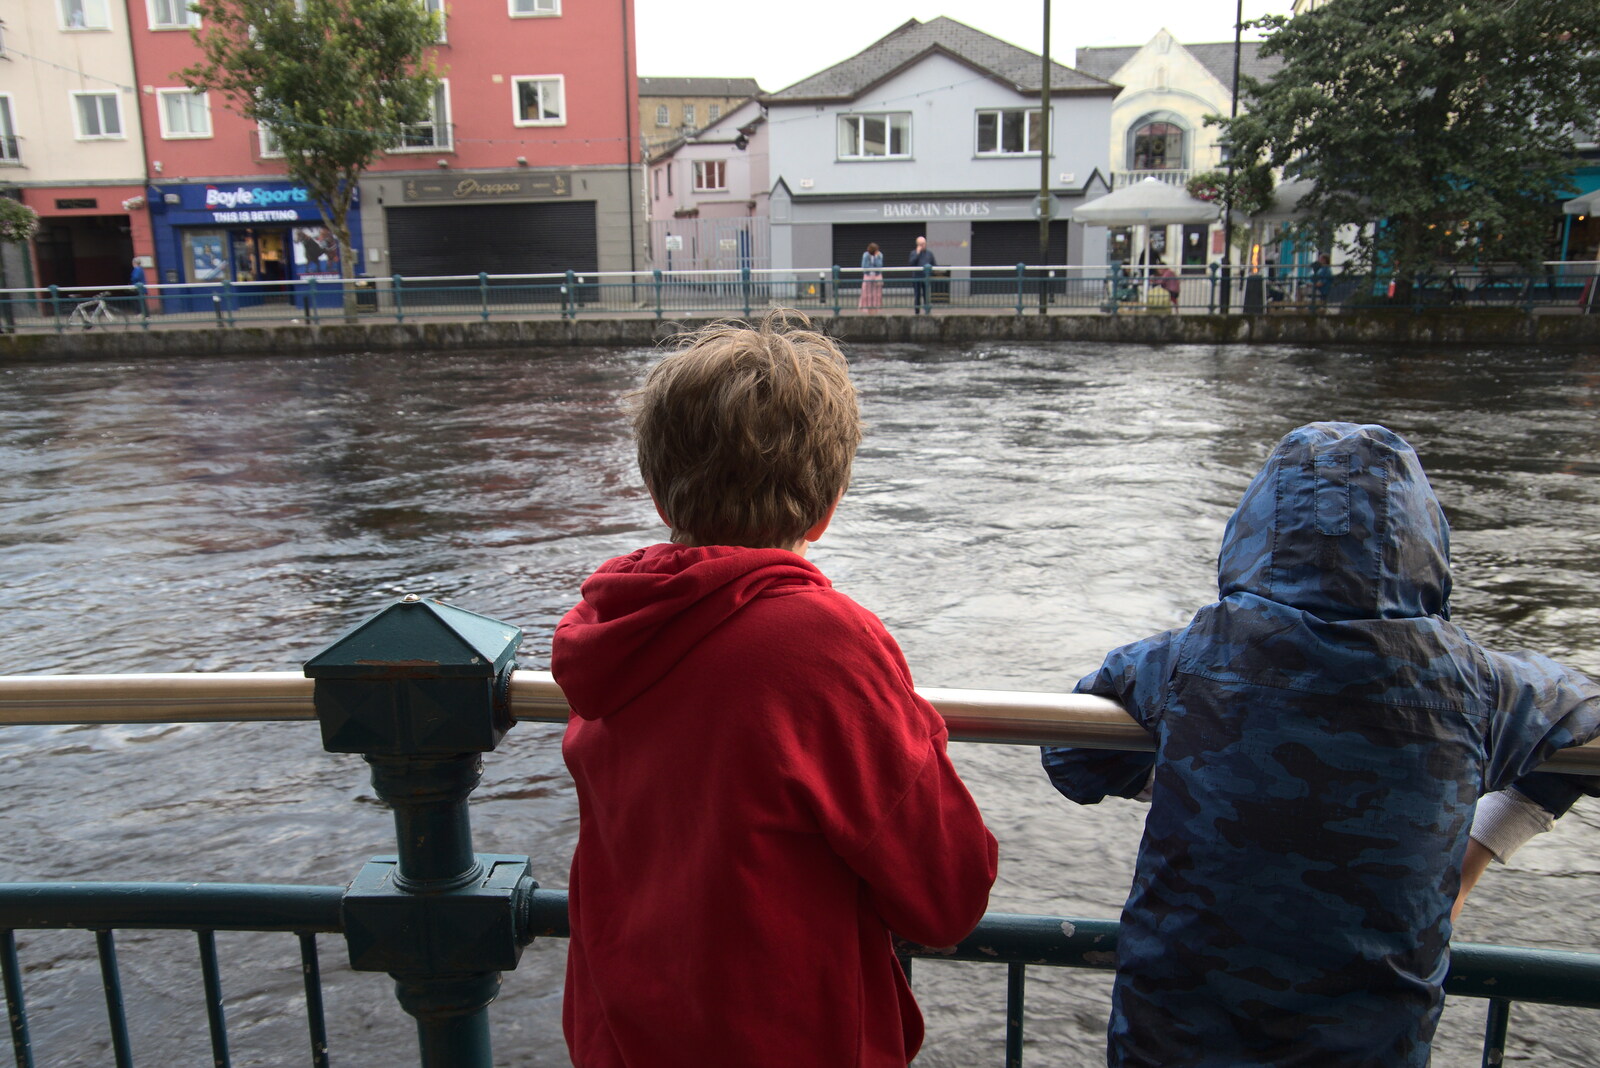 Pints of Guinness and Streedagh Beach, Grange and Sligo, Ireland - 9th August 2021: The boys look out over the almost-overflowing river